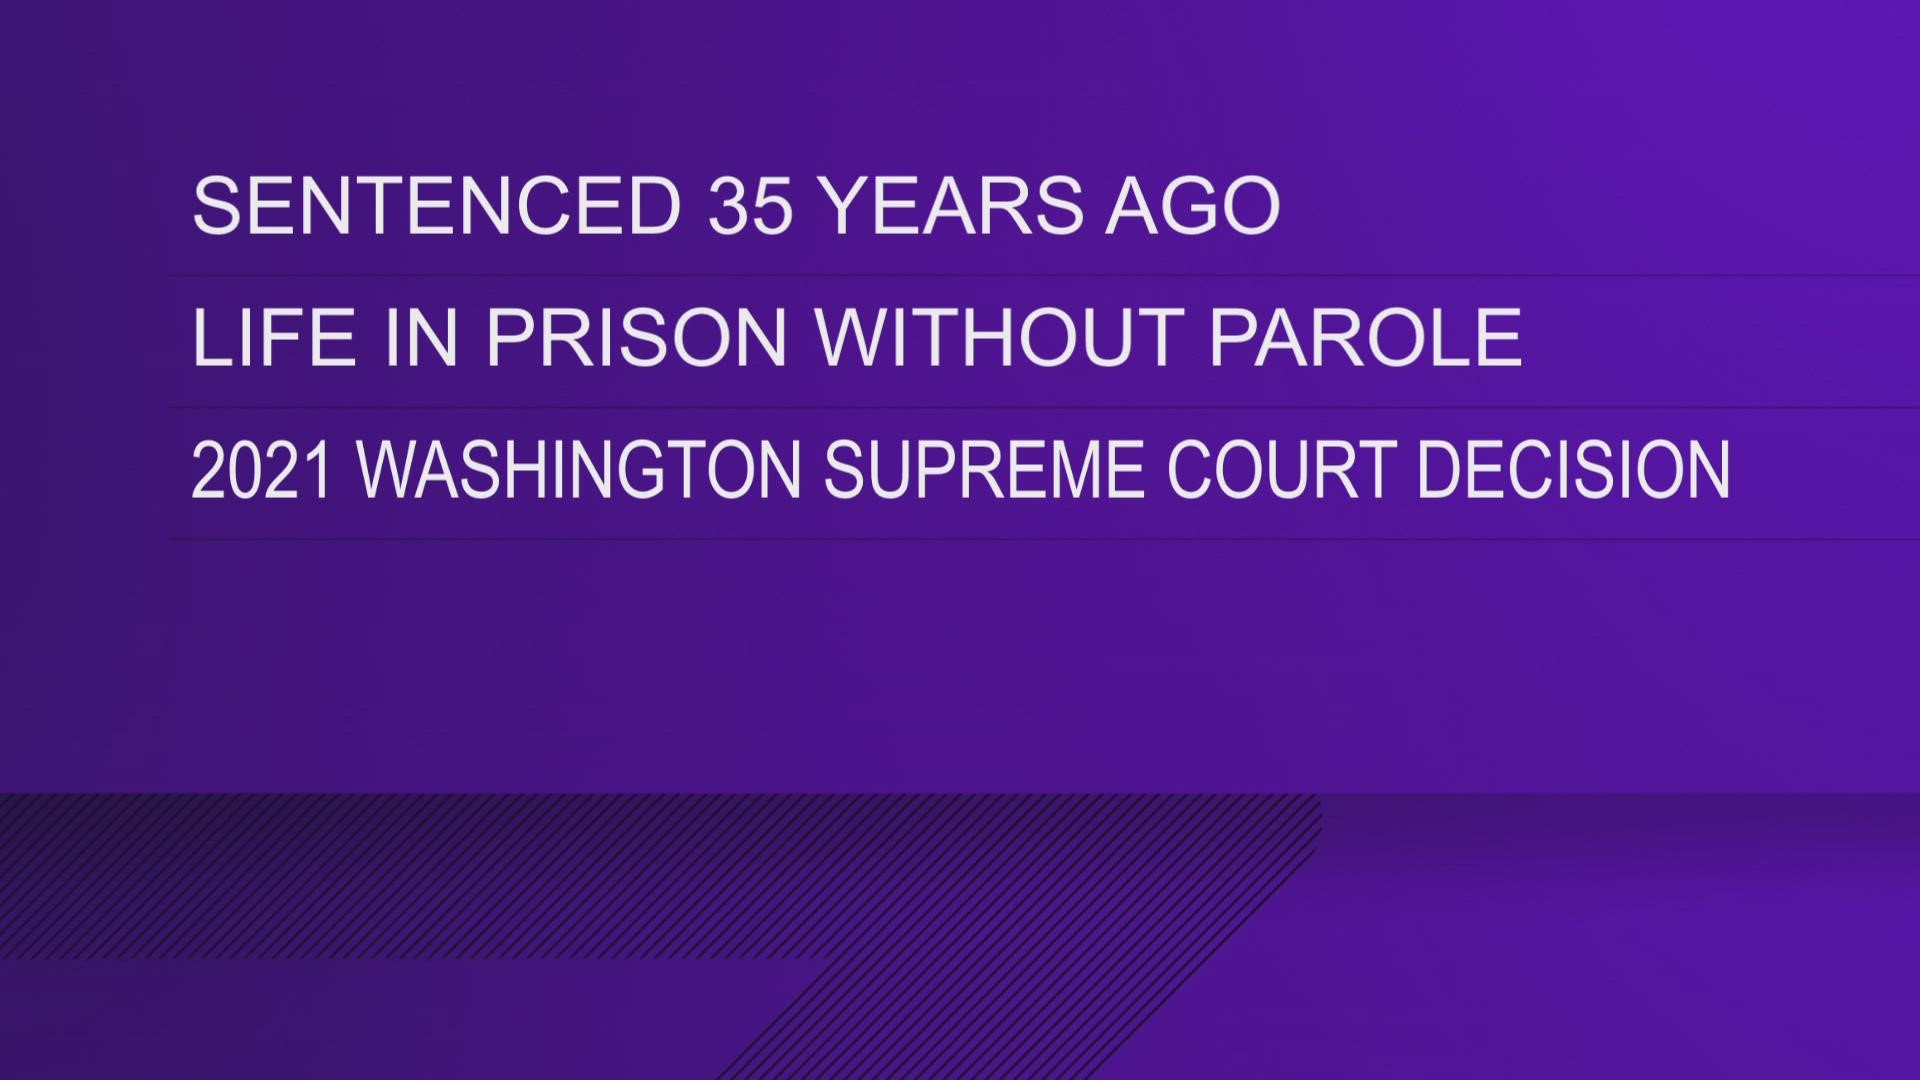 Christopher Blystone was just 20 years old when he was sentenced to life in prison without the possibility of parole in 1988.